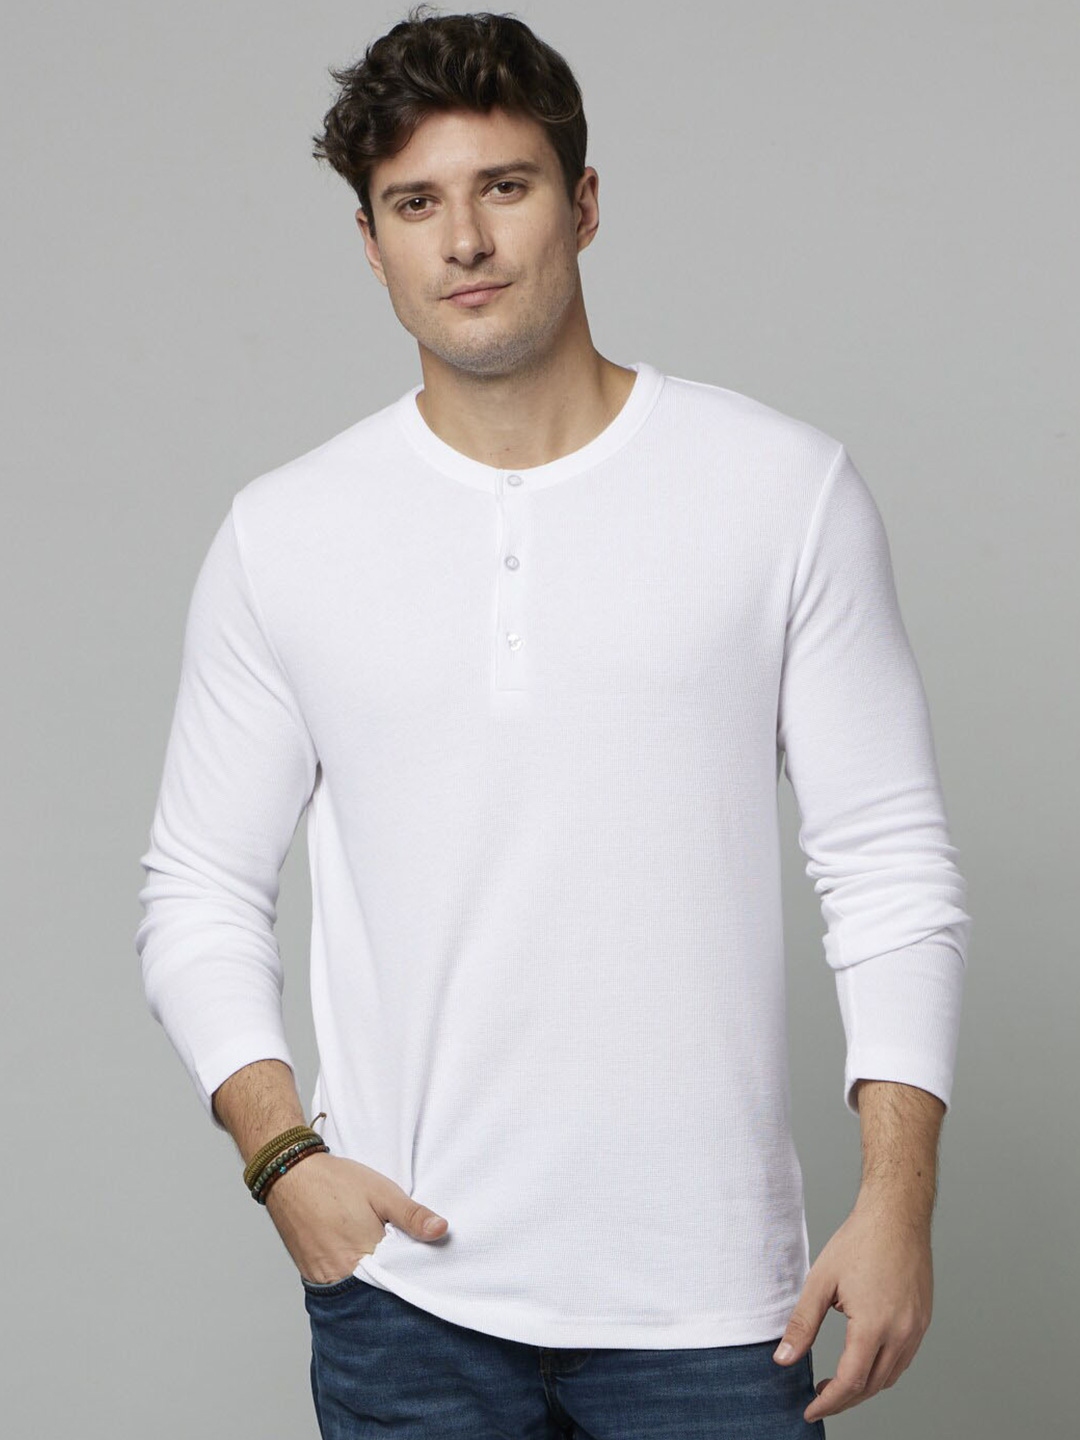 Buy Celio Henley Neck Long Sleeves Cotton T Shirt - Tshirts for Men ...